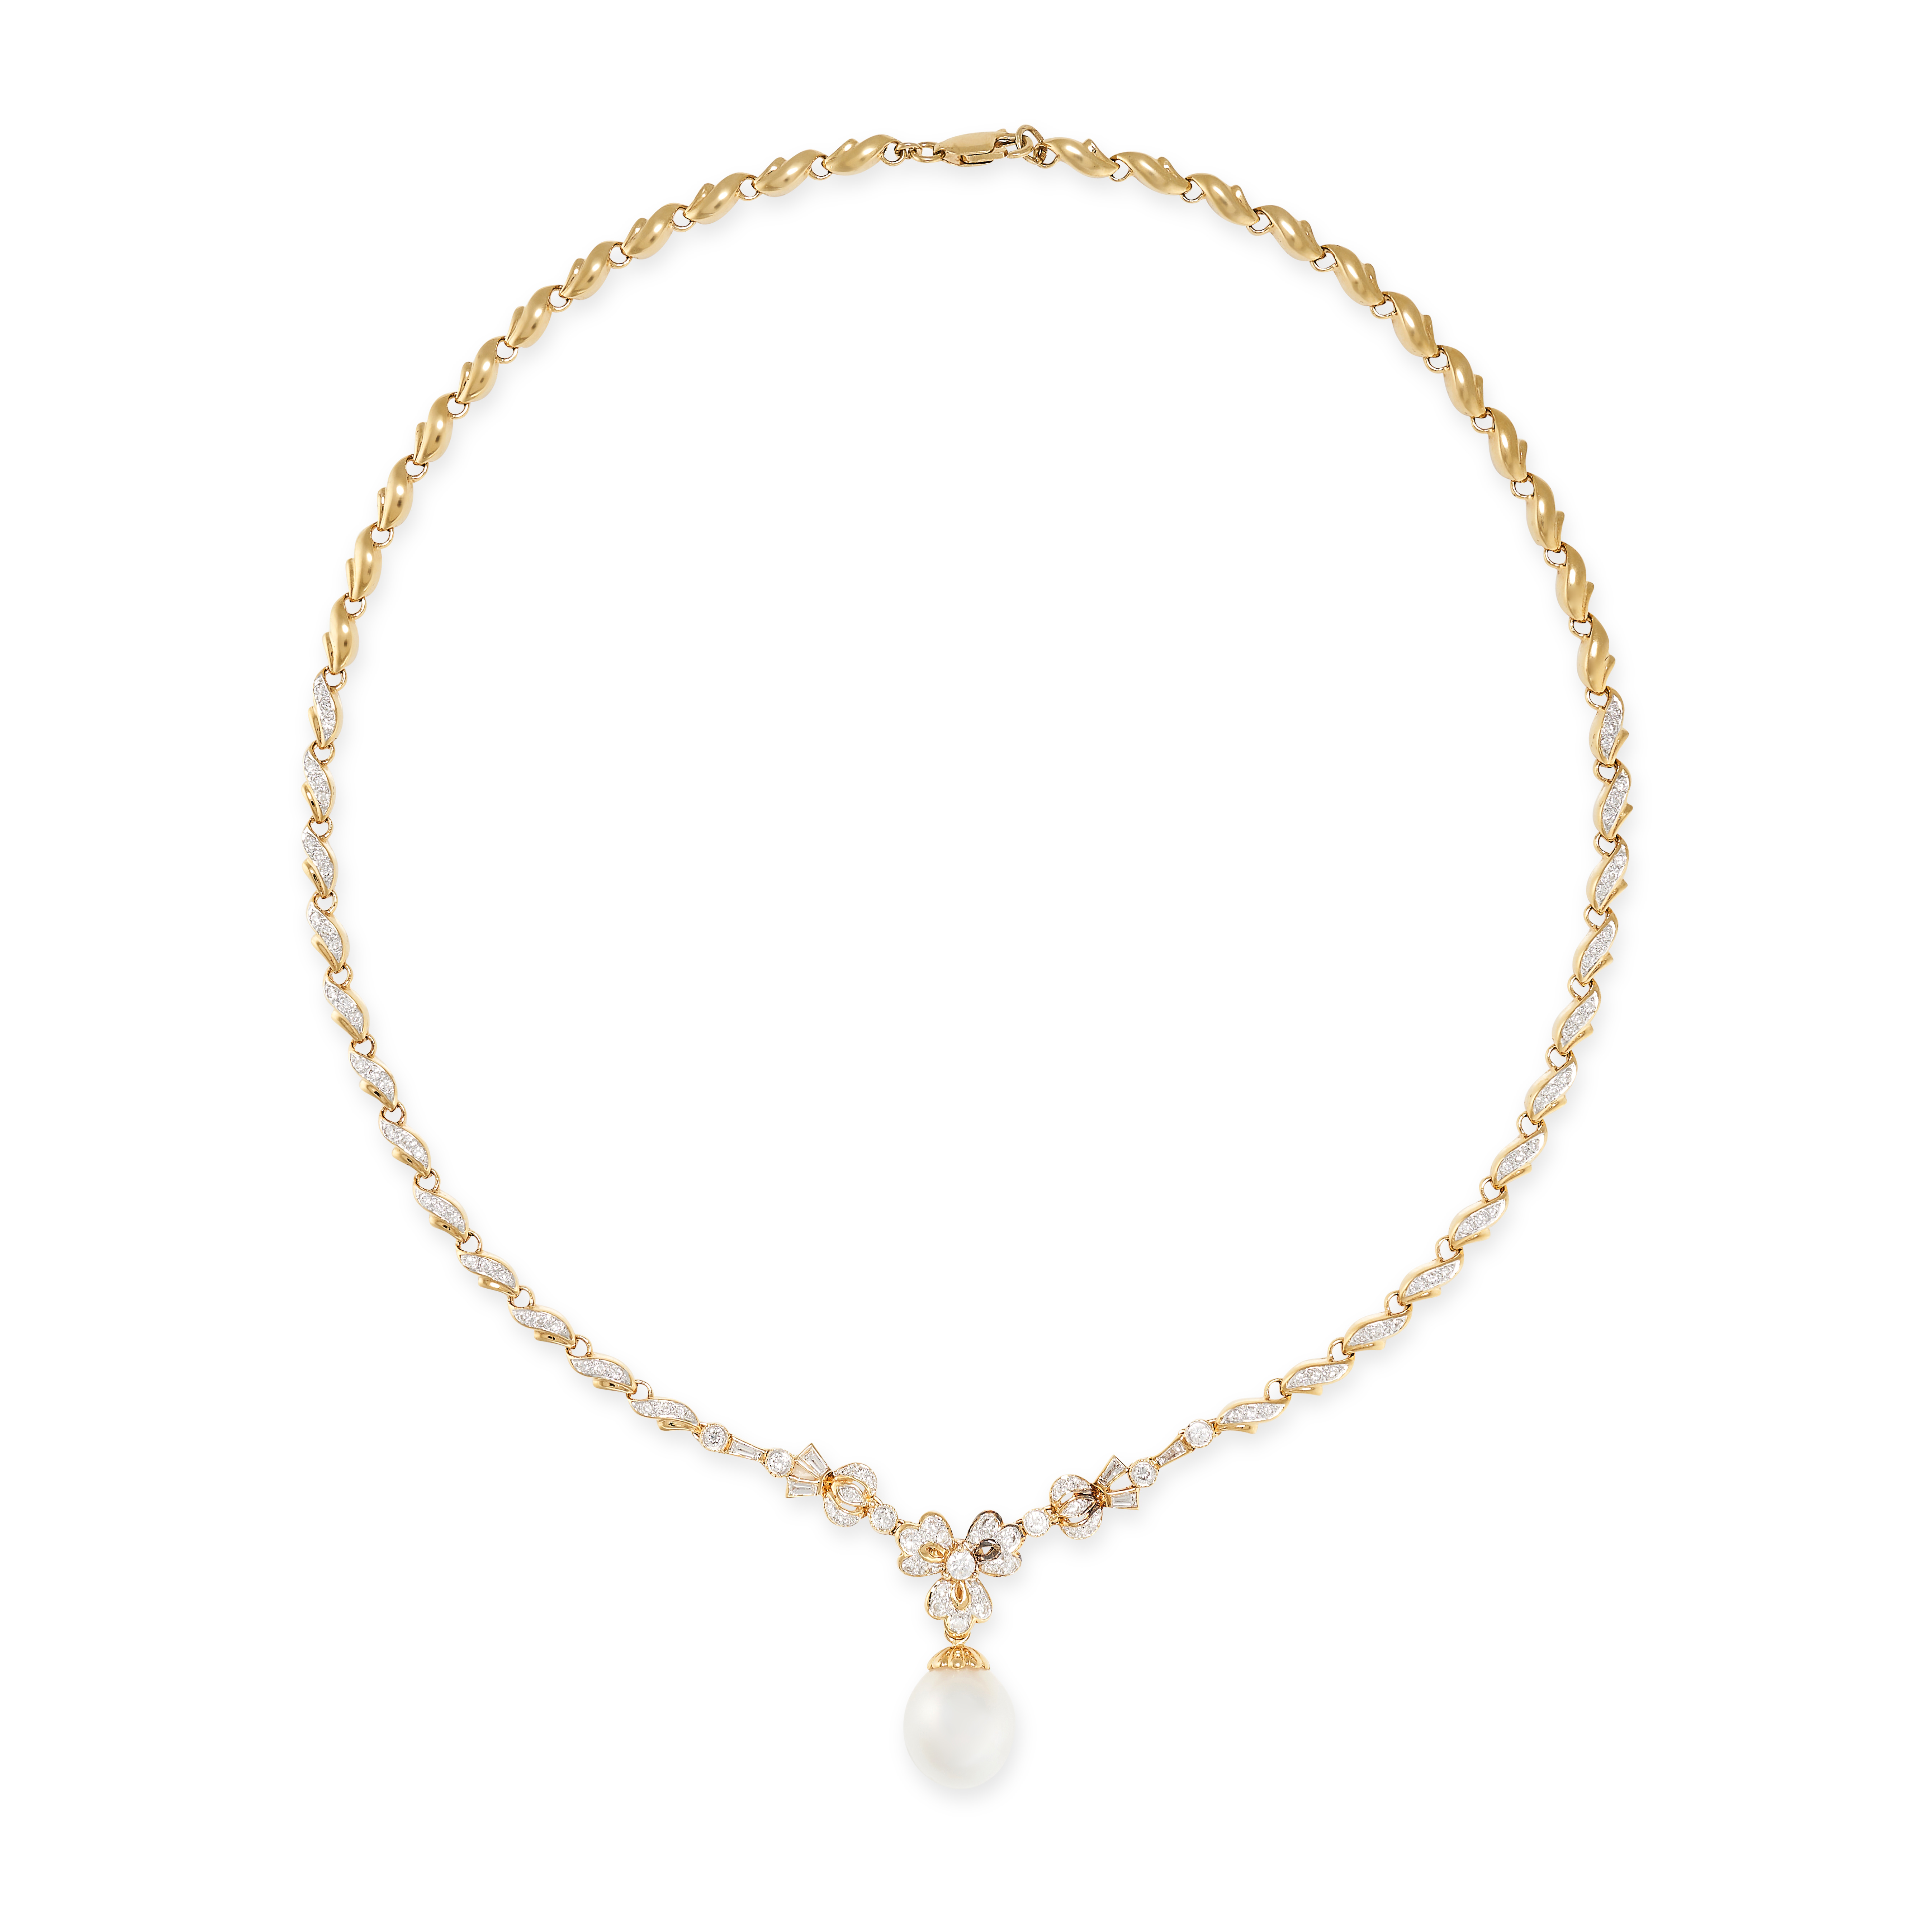 A DIAMOND AND PEARL NECKLACE in 18ct yellow gold, set with a pearl drop suspended from a ribbon